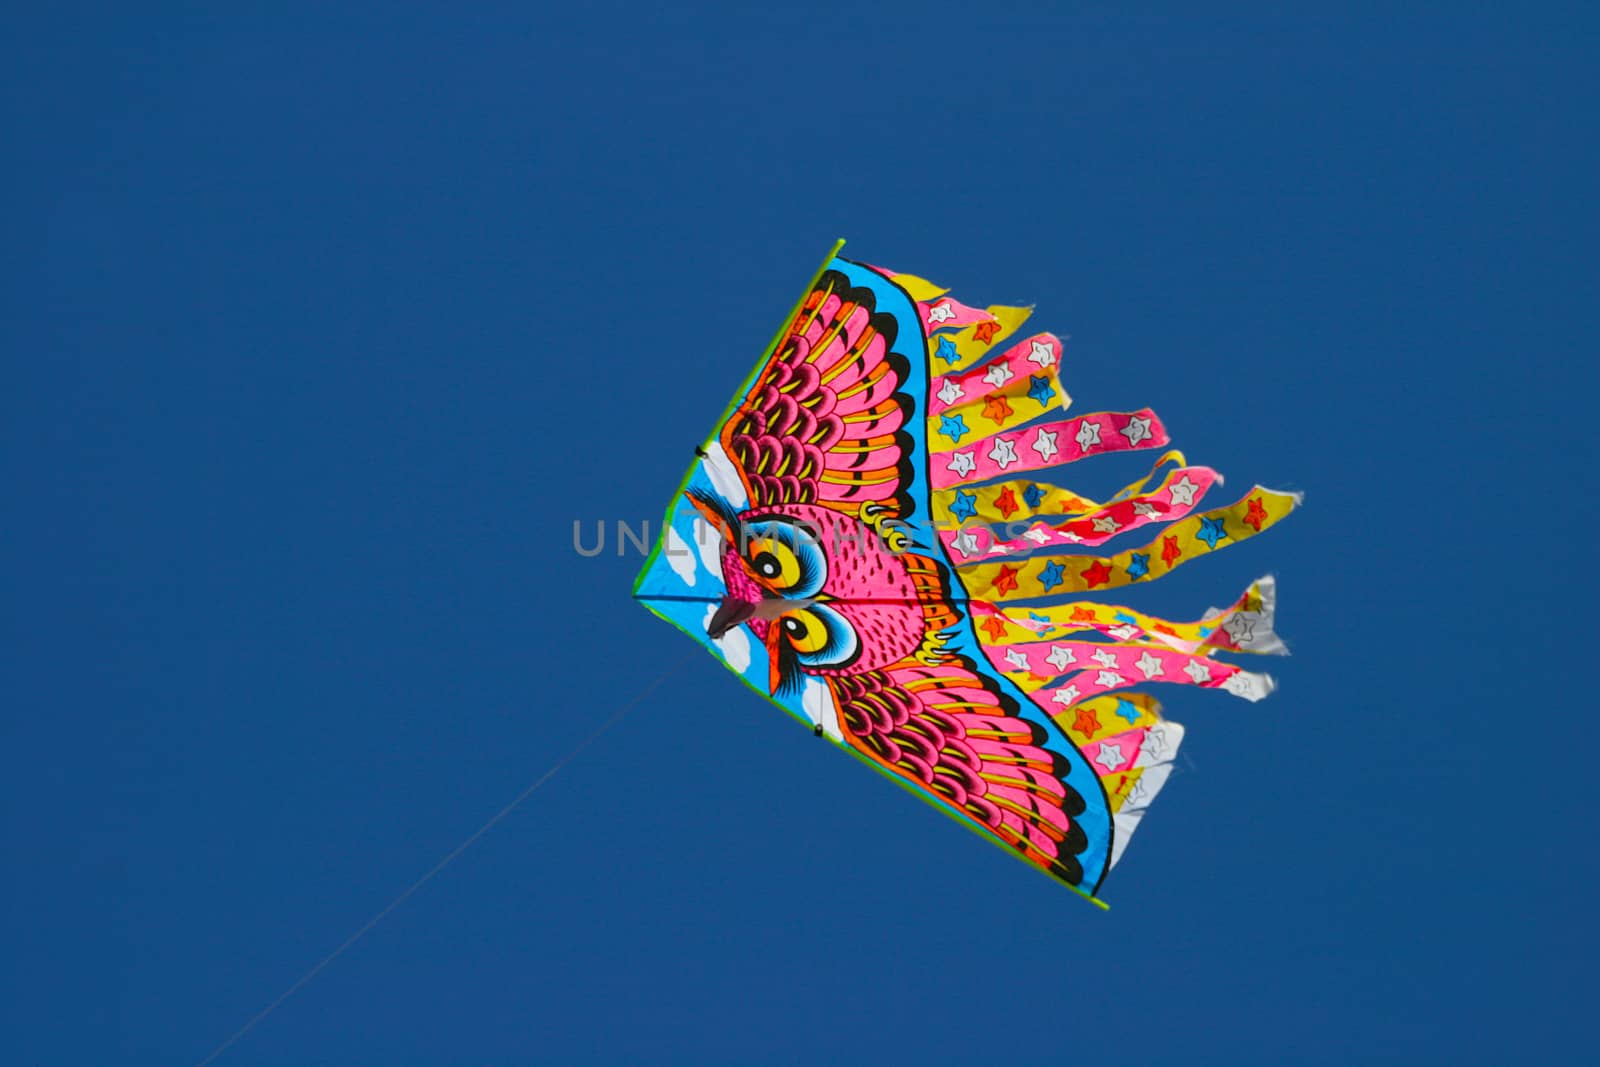 A kite with stripes of red high above the ground in a clear blue sky.